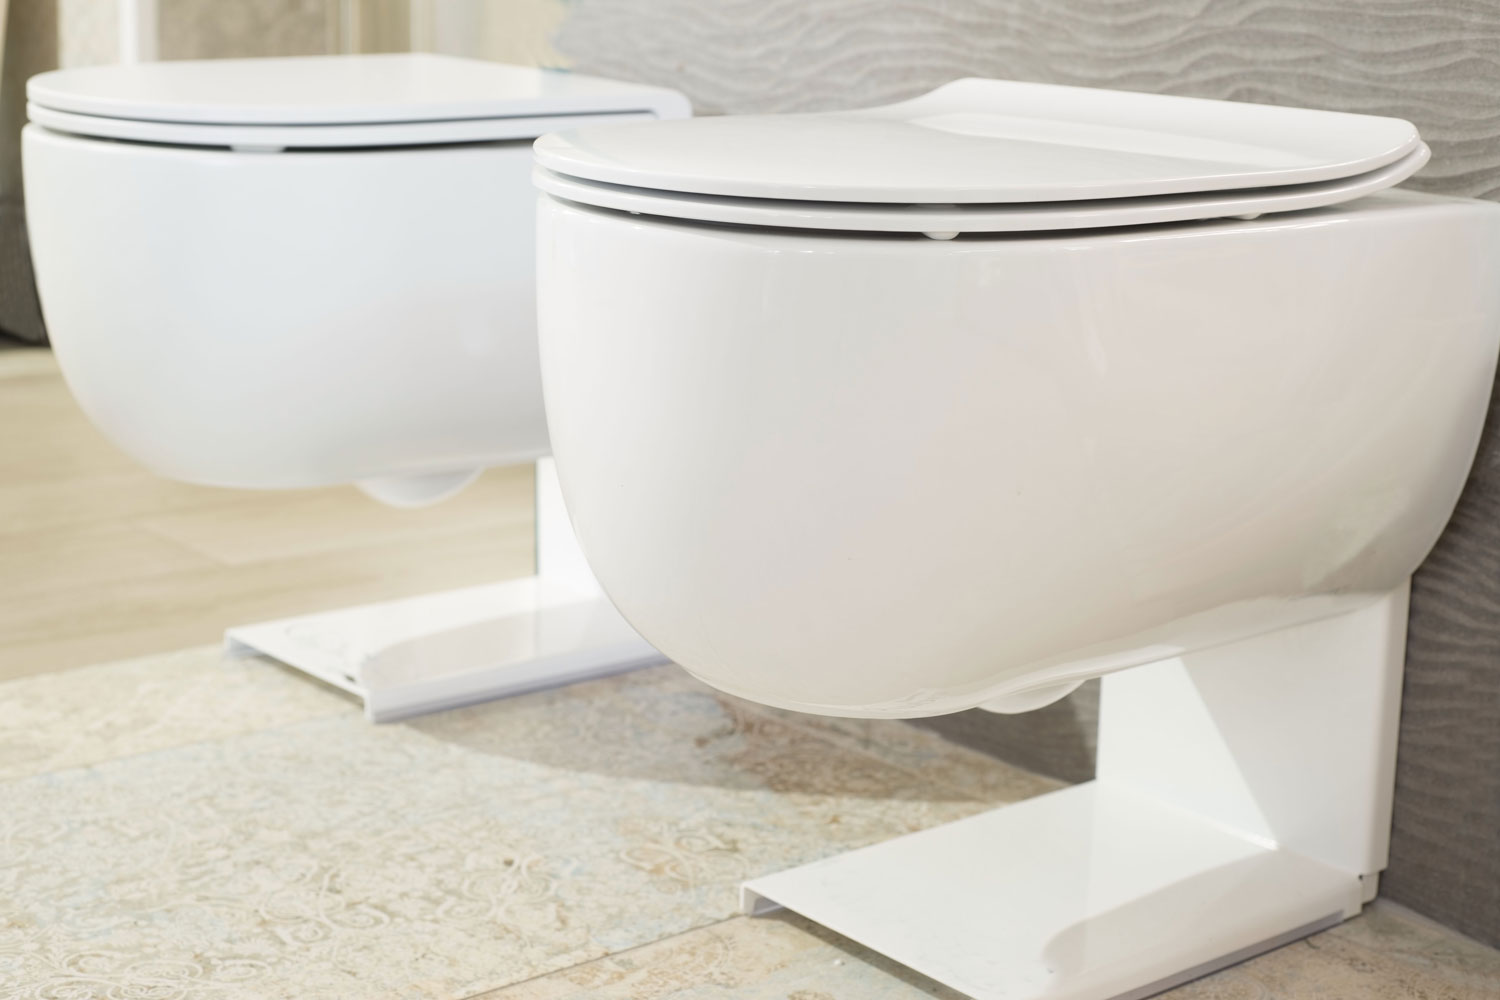 Two modern designed floating toilets